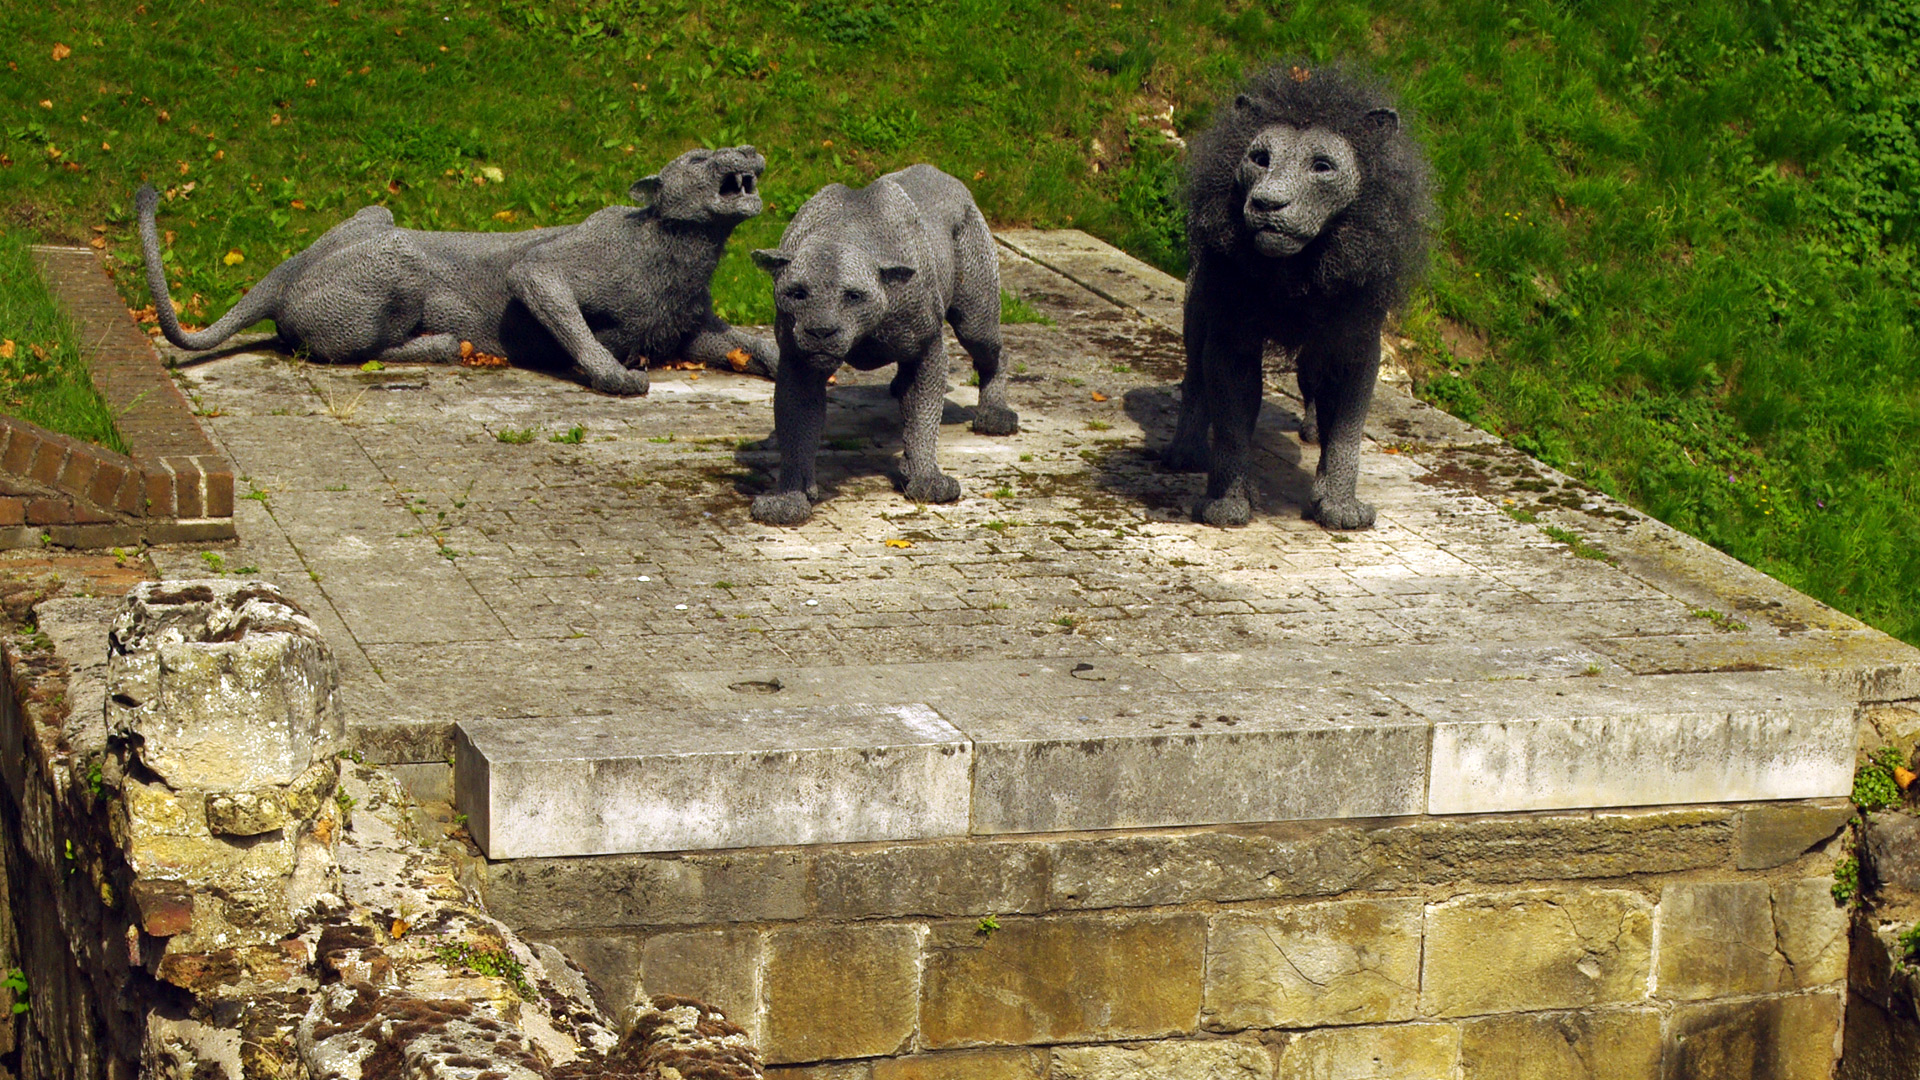 Tower London zoo menagerie exotic animals life size sculptures